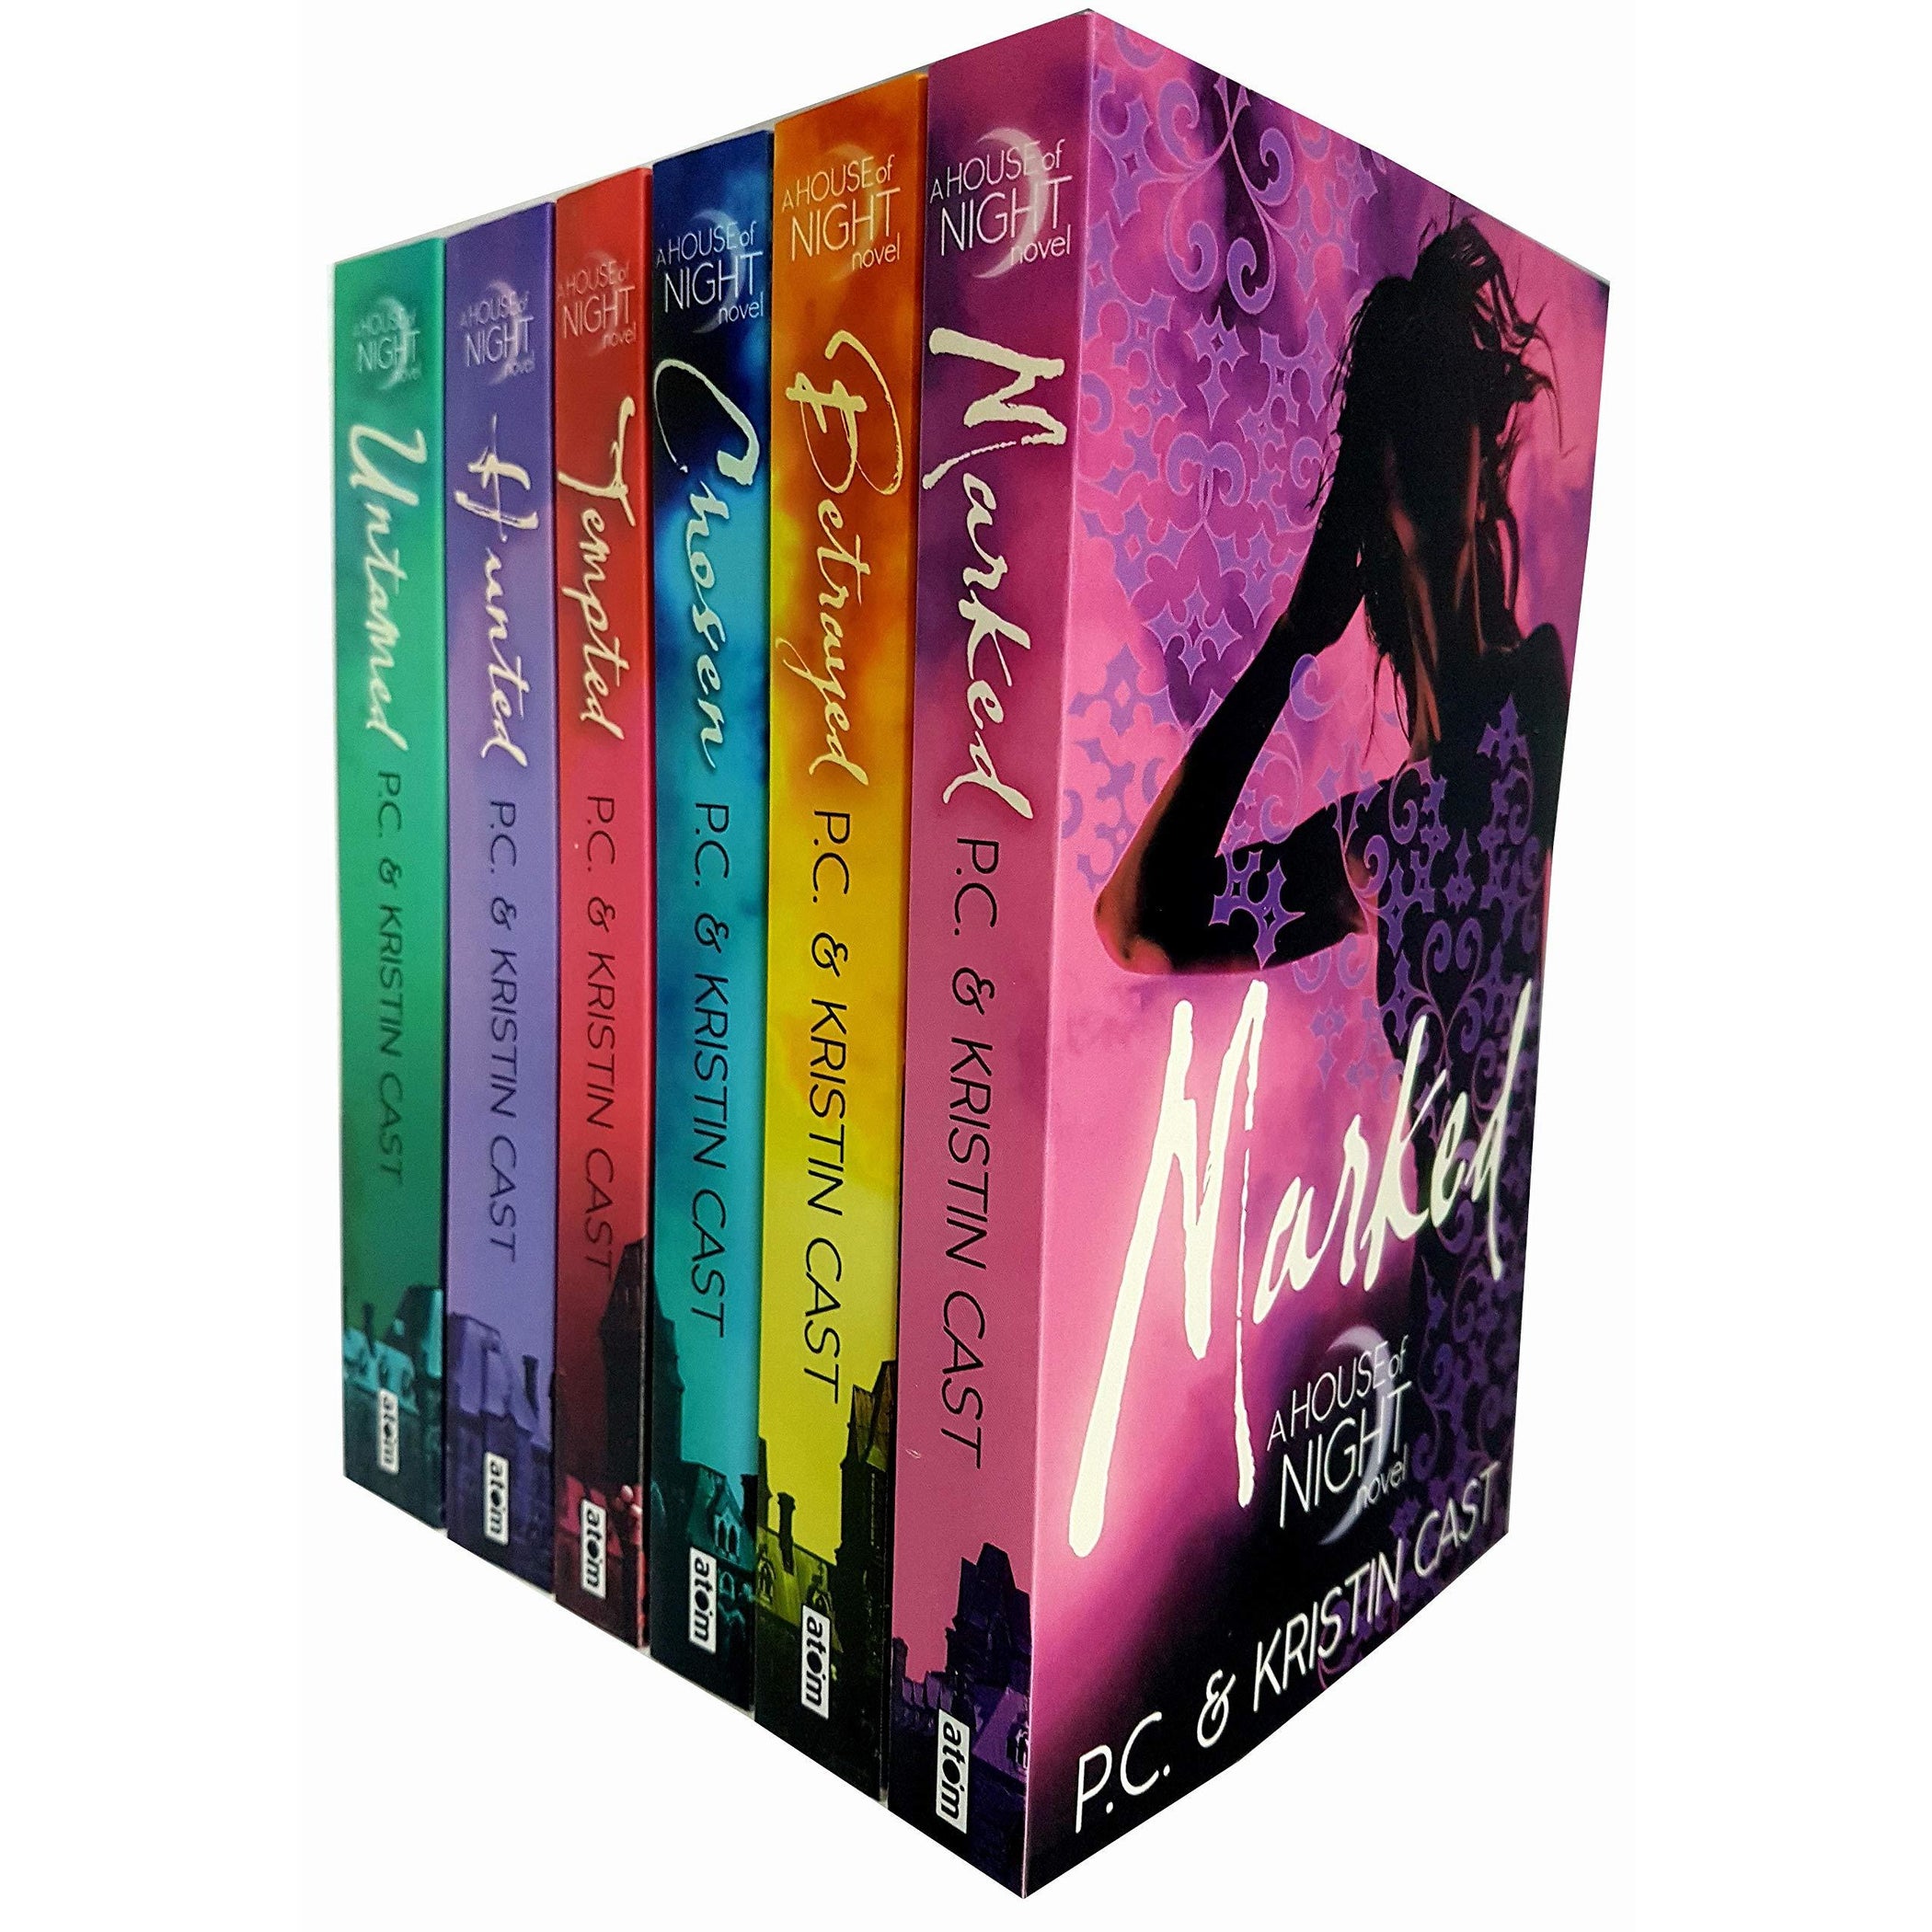 kristin cast house of night books in order